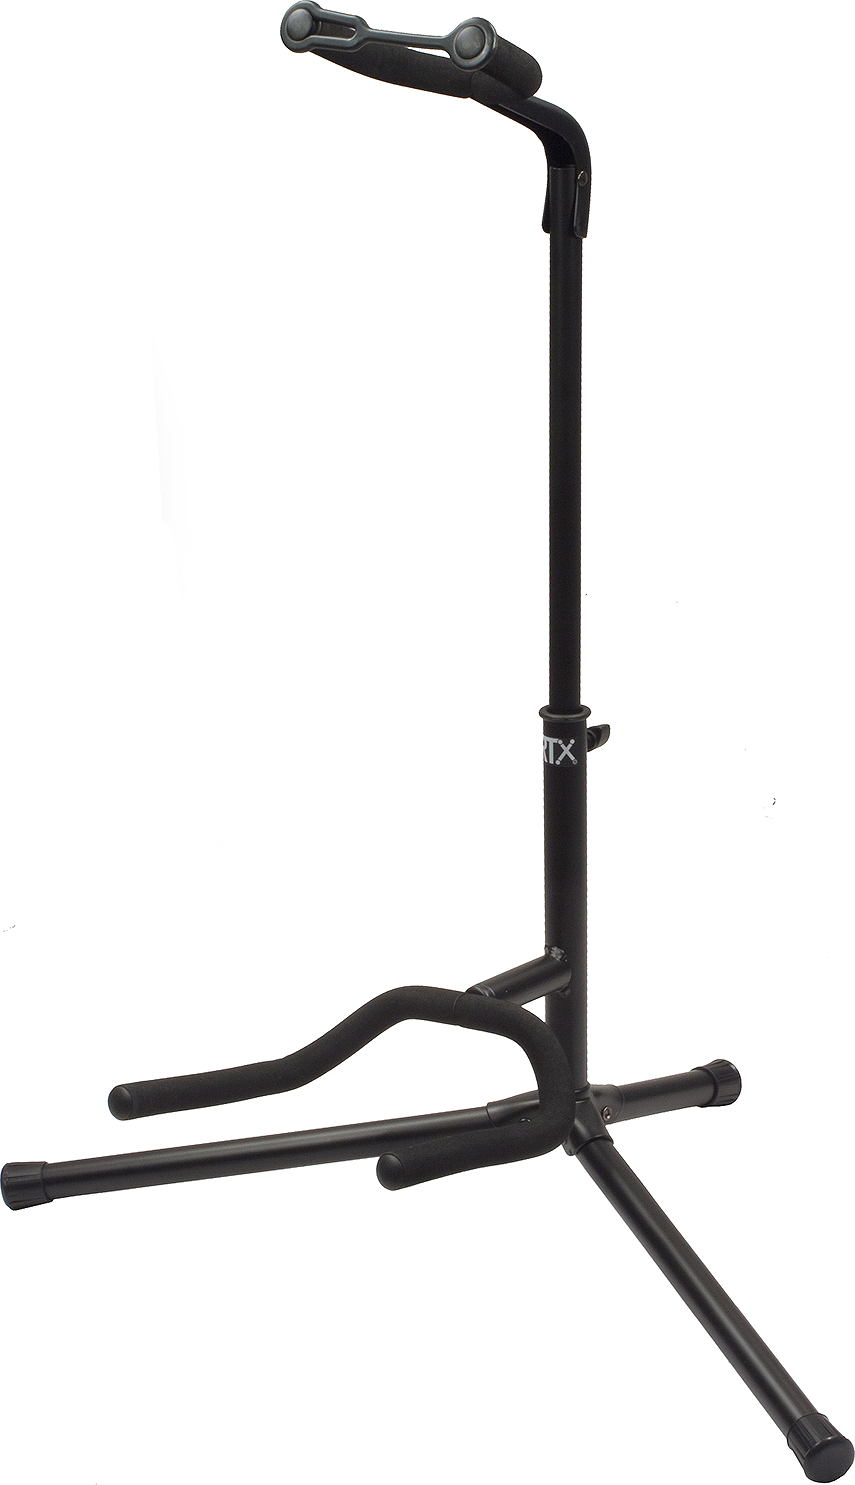 Rtx G1nx Stand Guitare Universel TÊte Pliable - Noir - Gitaarstandaard - Main picture